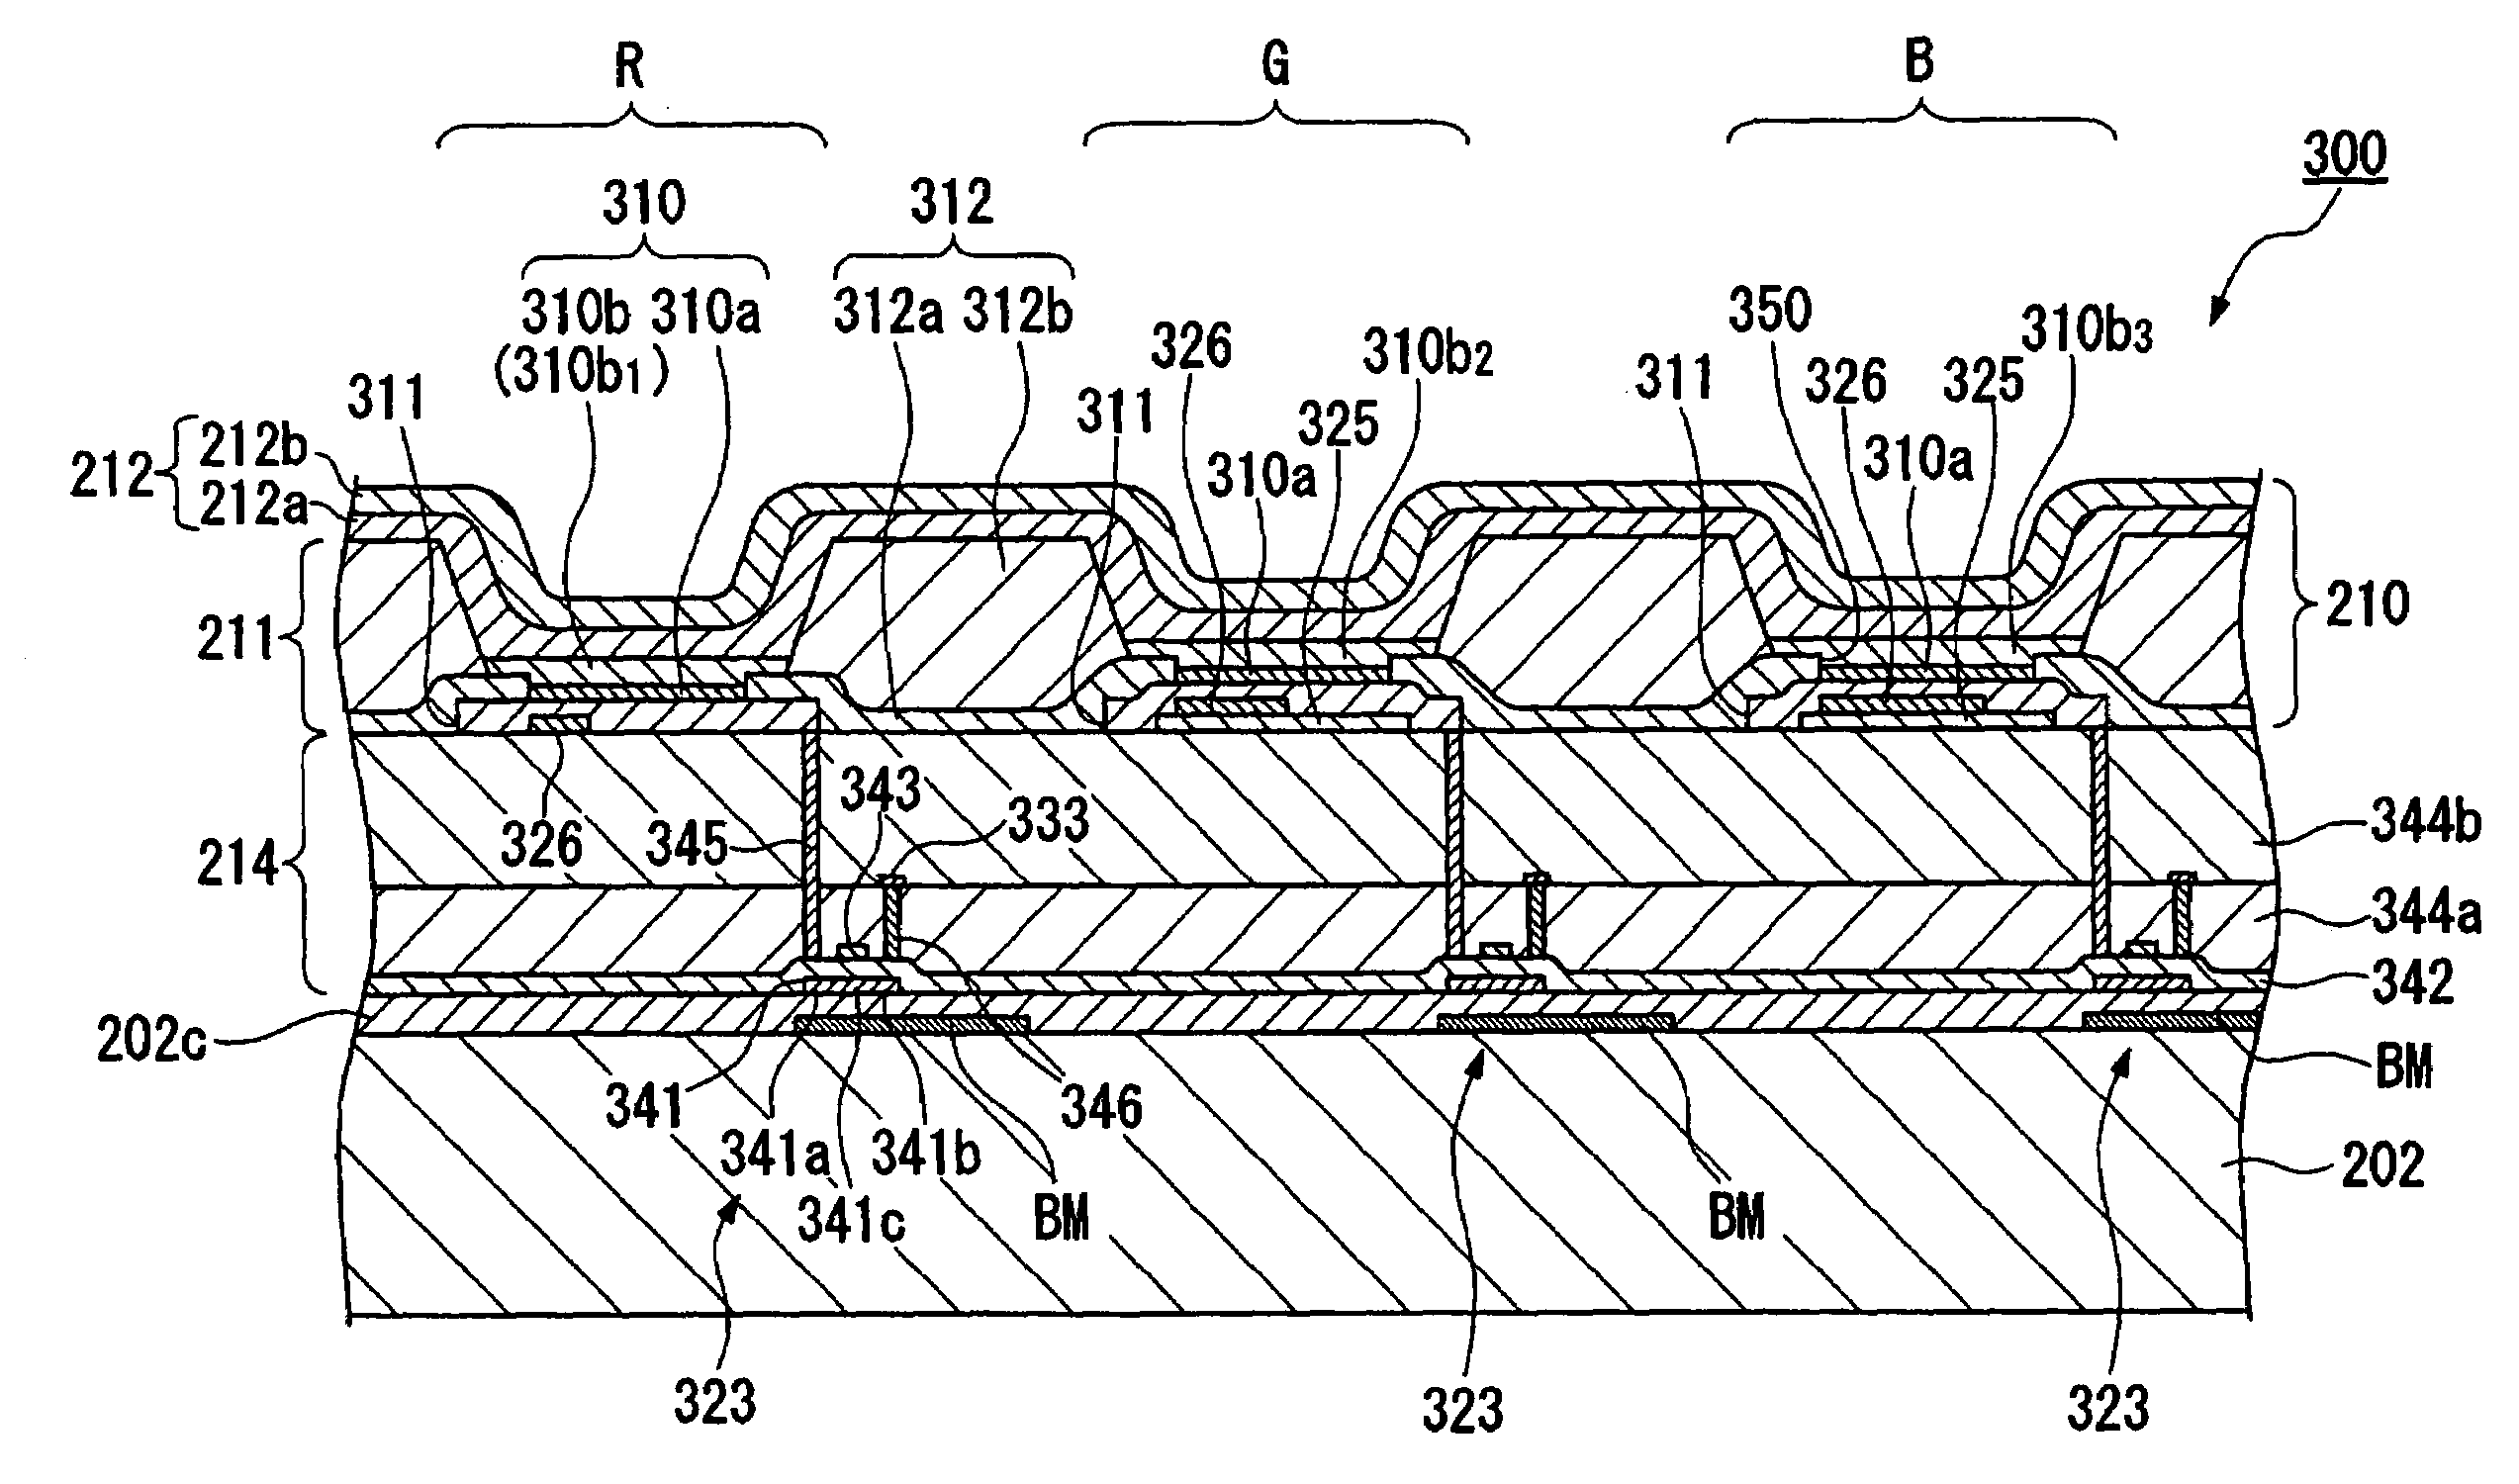 Organic EL device having a transflective layer and a light-reflective electrode constituting an optical resonator